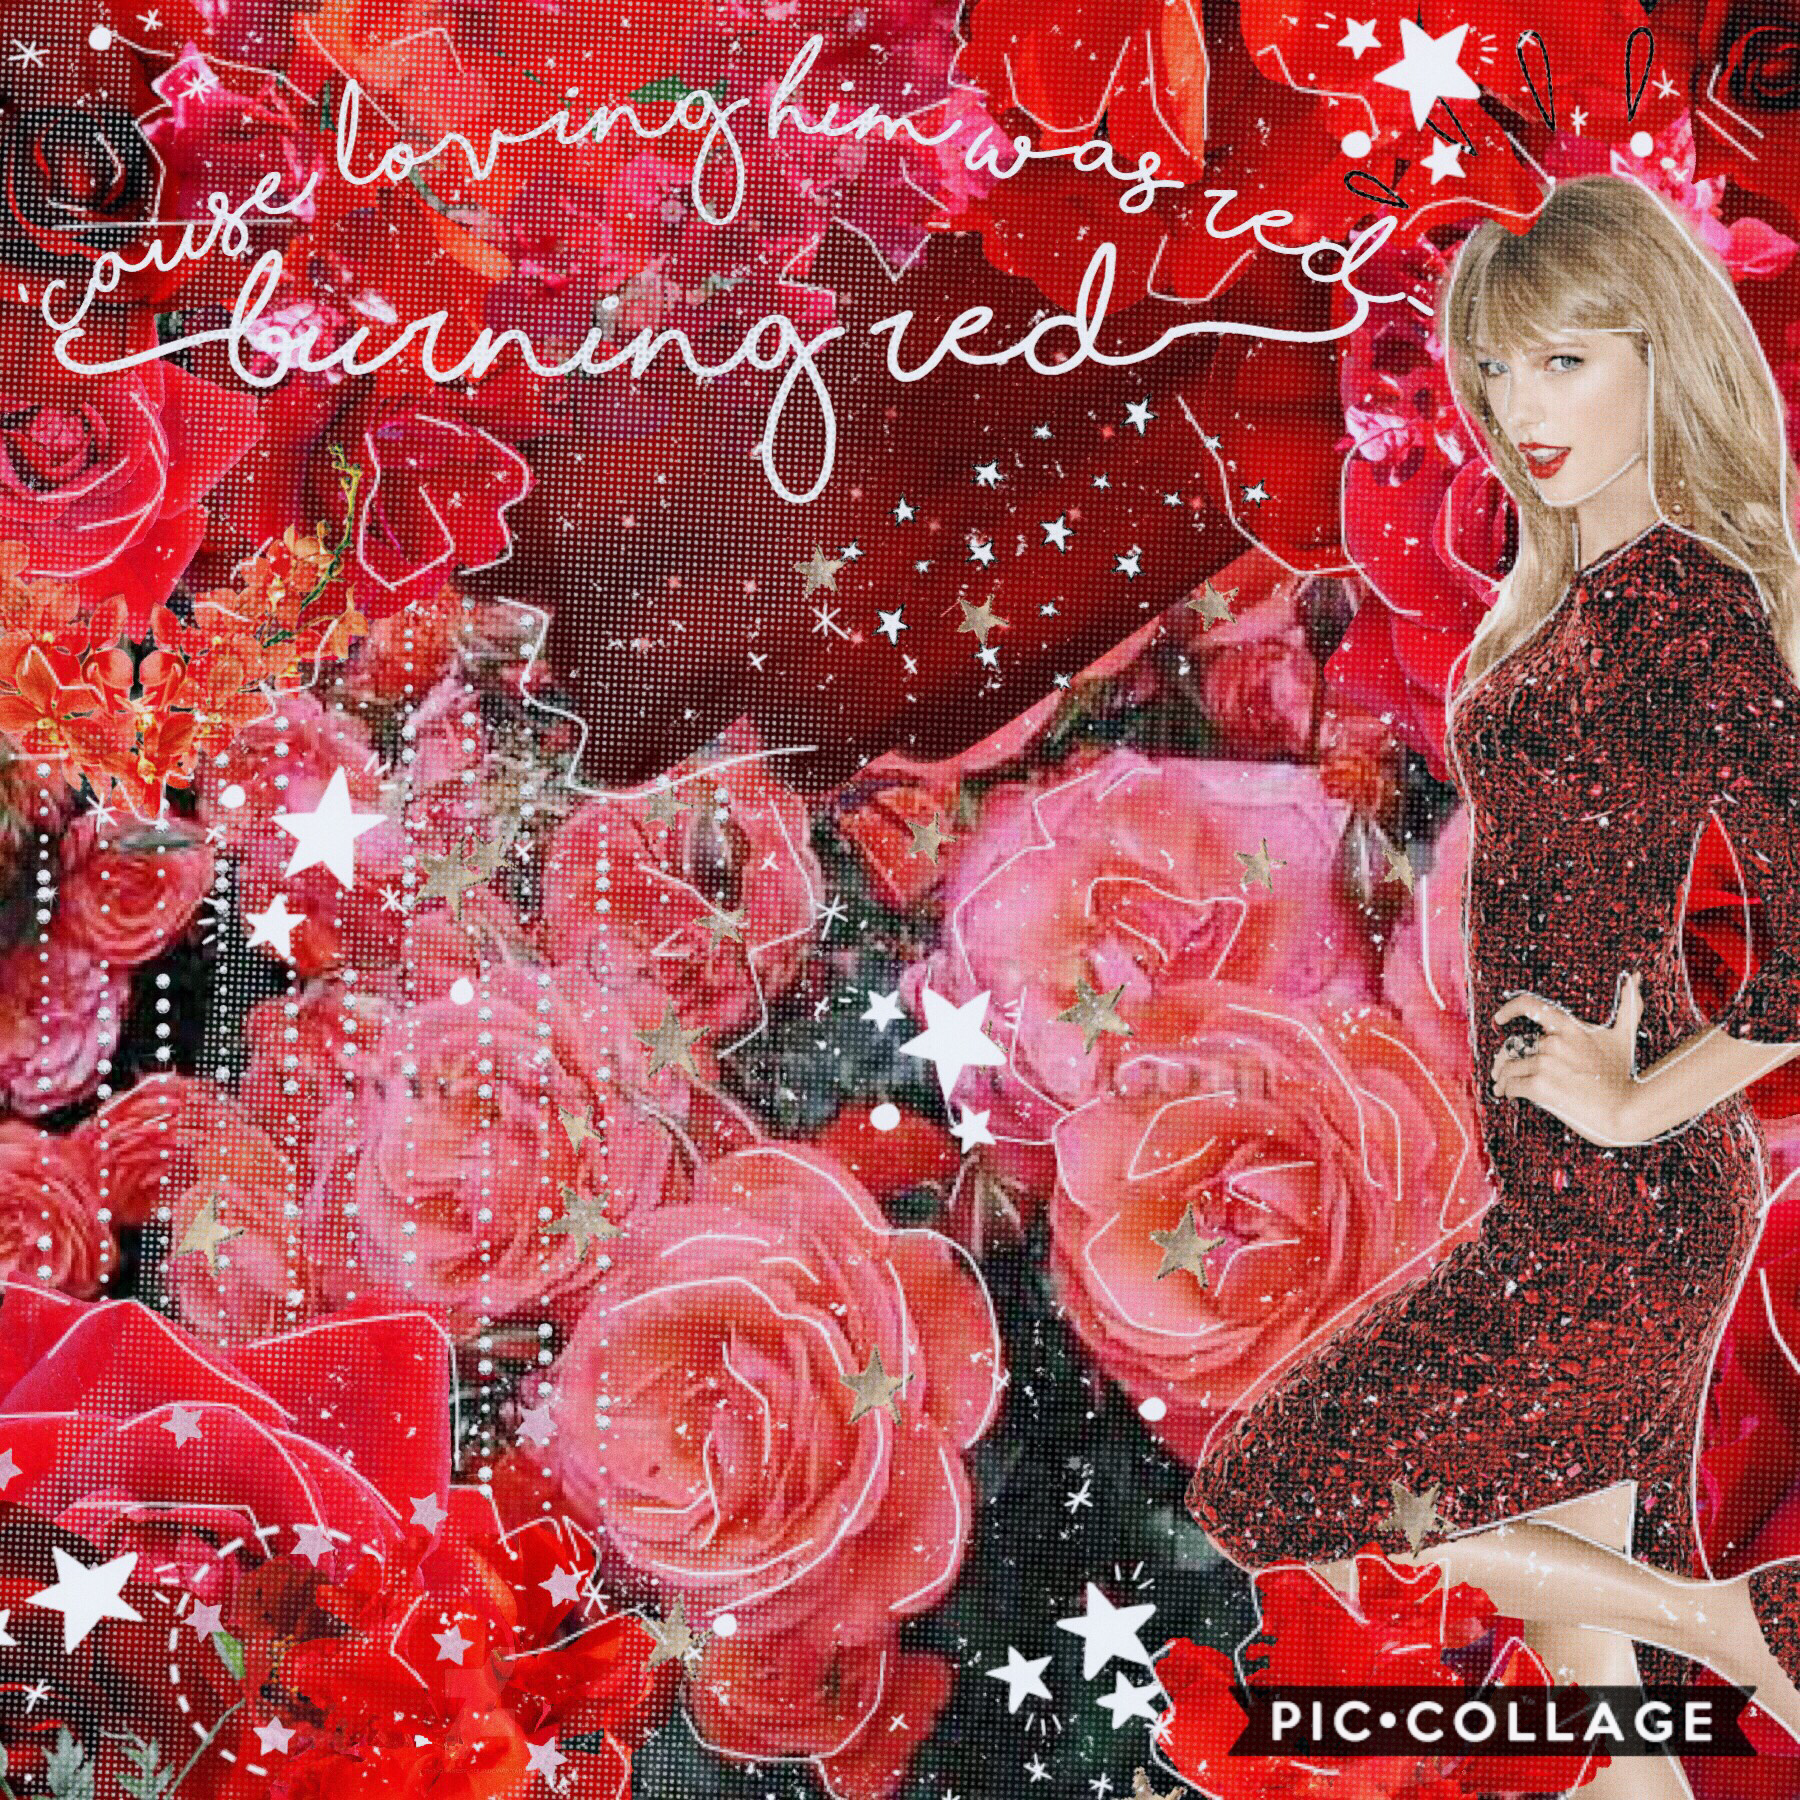 Tappyyy

Taylor Swift~

#thanks for all the support!

💓❤️💗